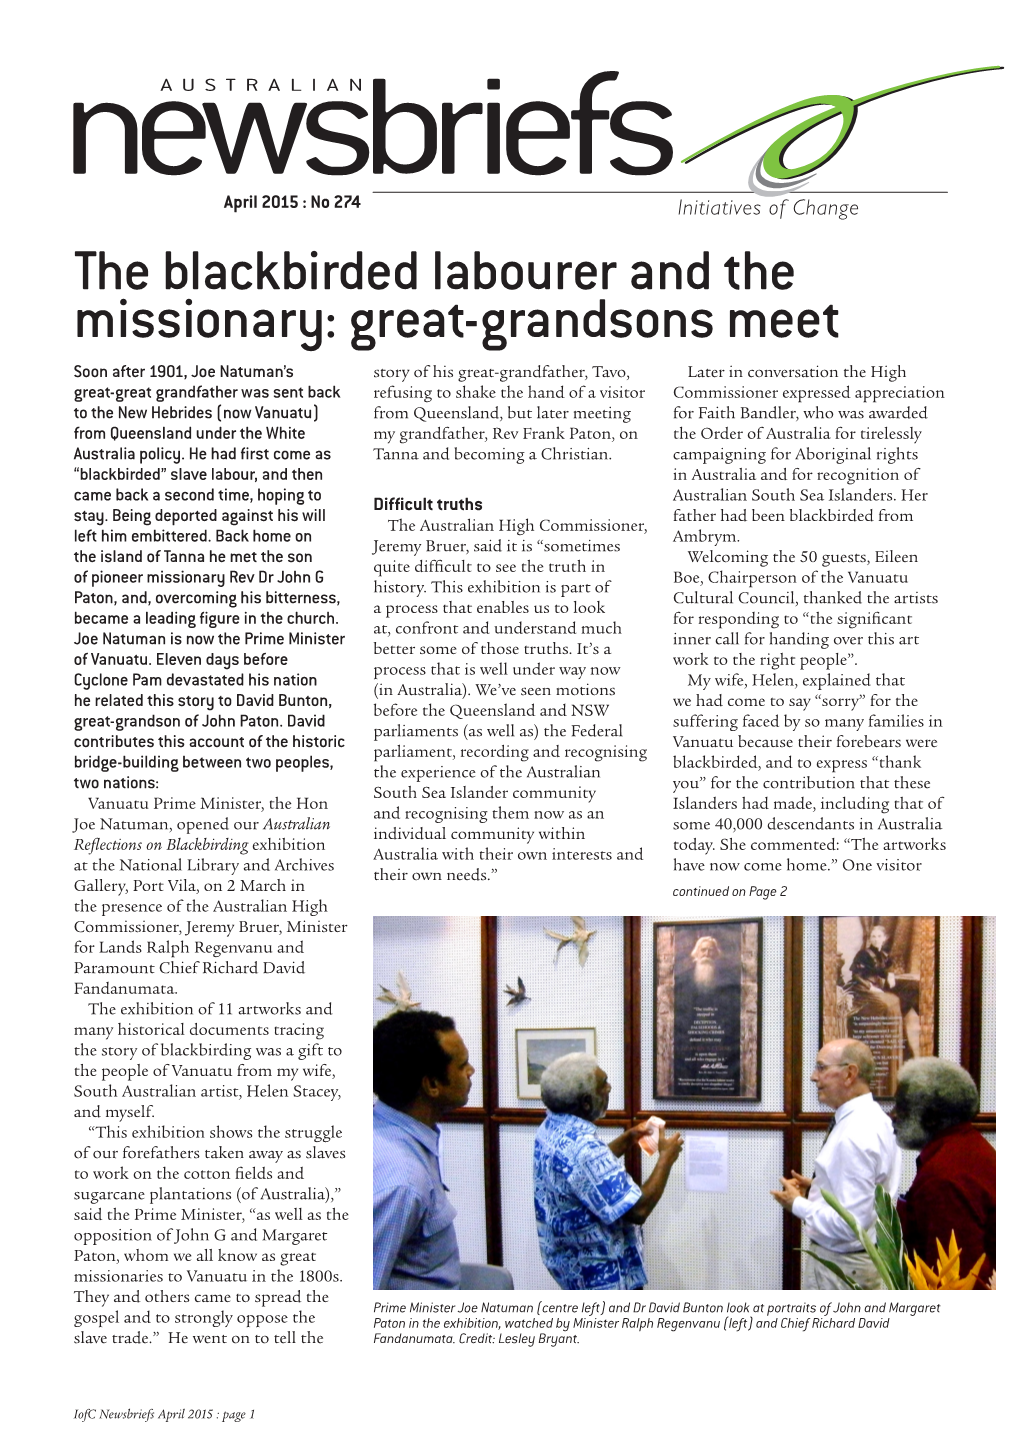 The Blackbirded Labourer and the Missionary: Great-Grandsons Meet